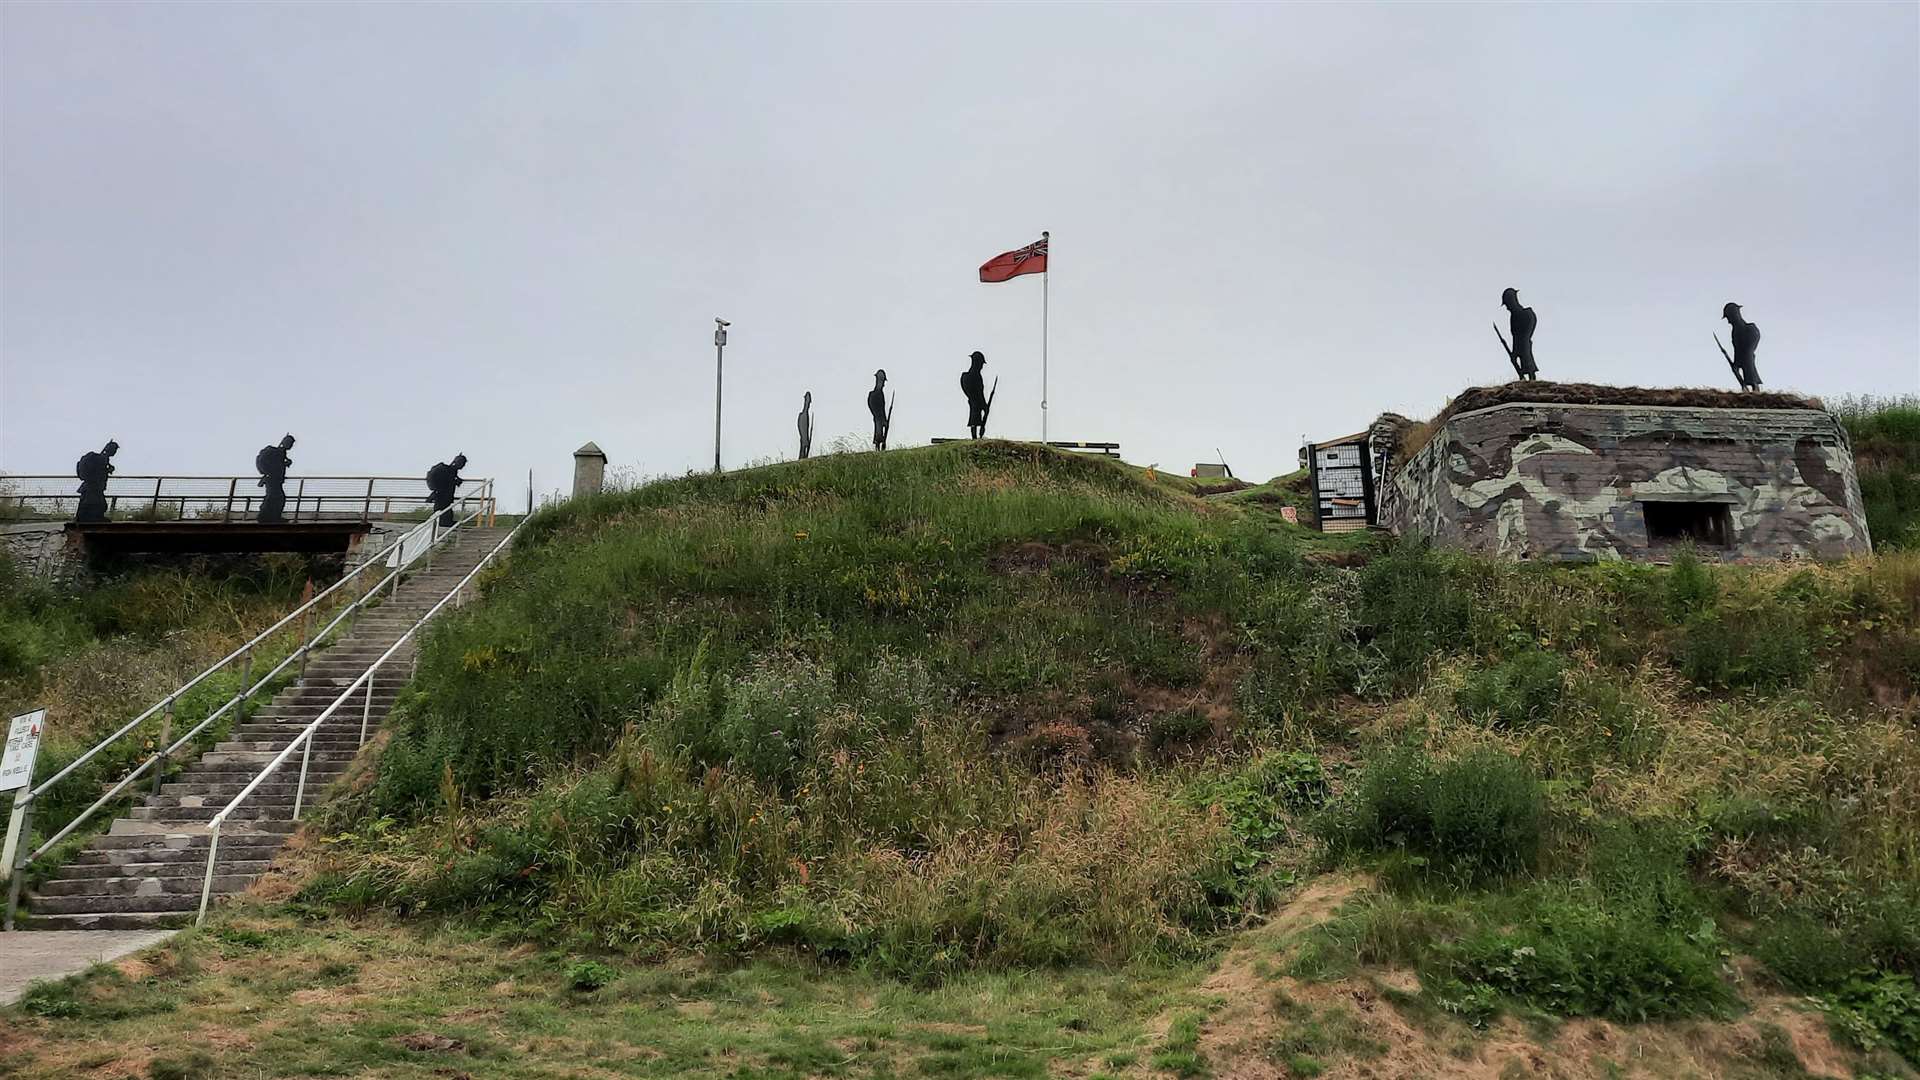 Some of the soldier figures standing out against the sky during an open day at the pillbox. Picture: Willie Watt